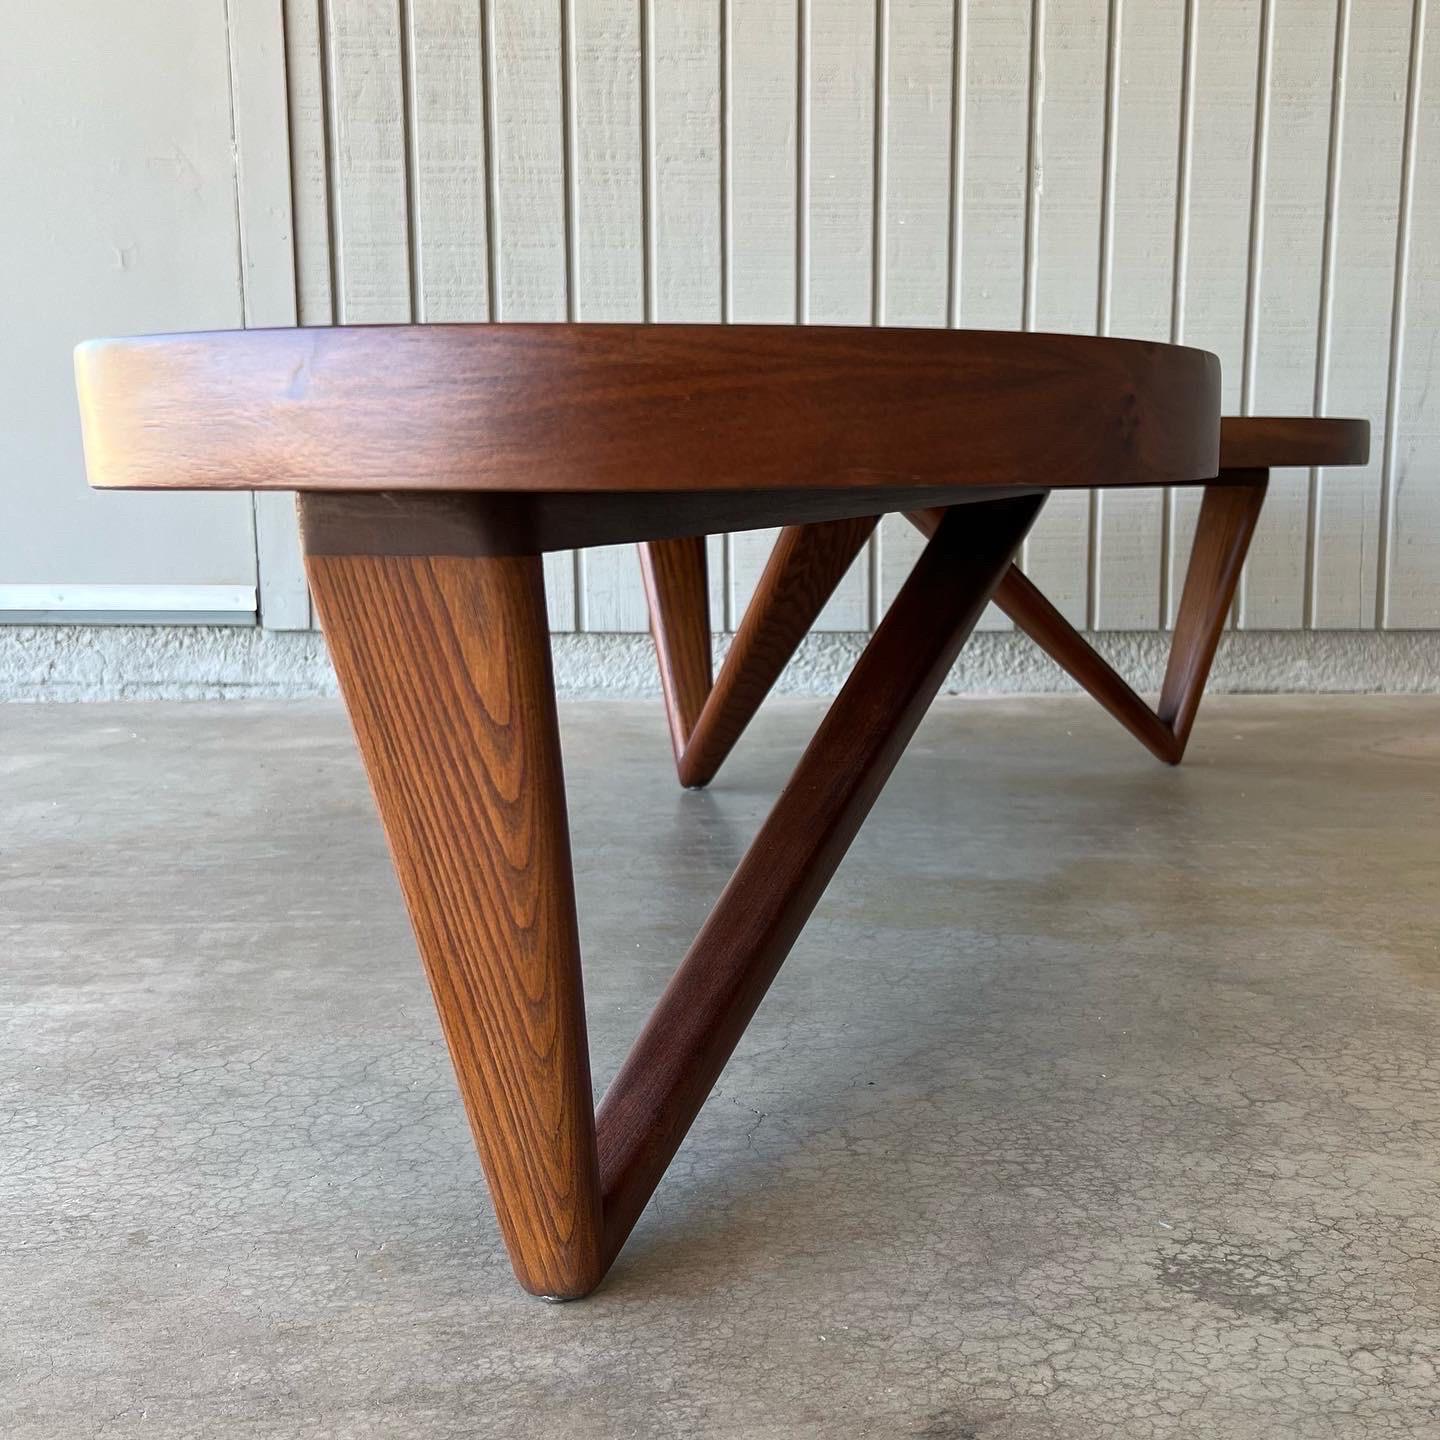 Mahogany Mid-Century Modern Boomerang or Kidney Shaped Wood Coffee or Cocktail Table For Sale